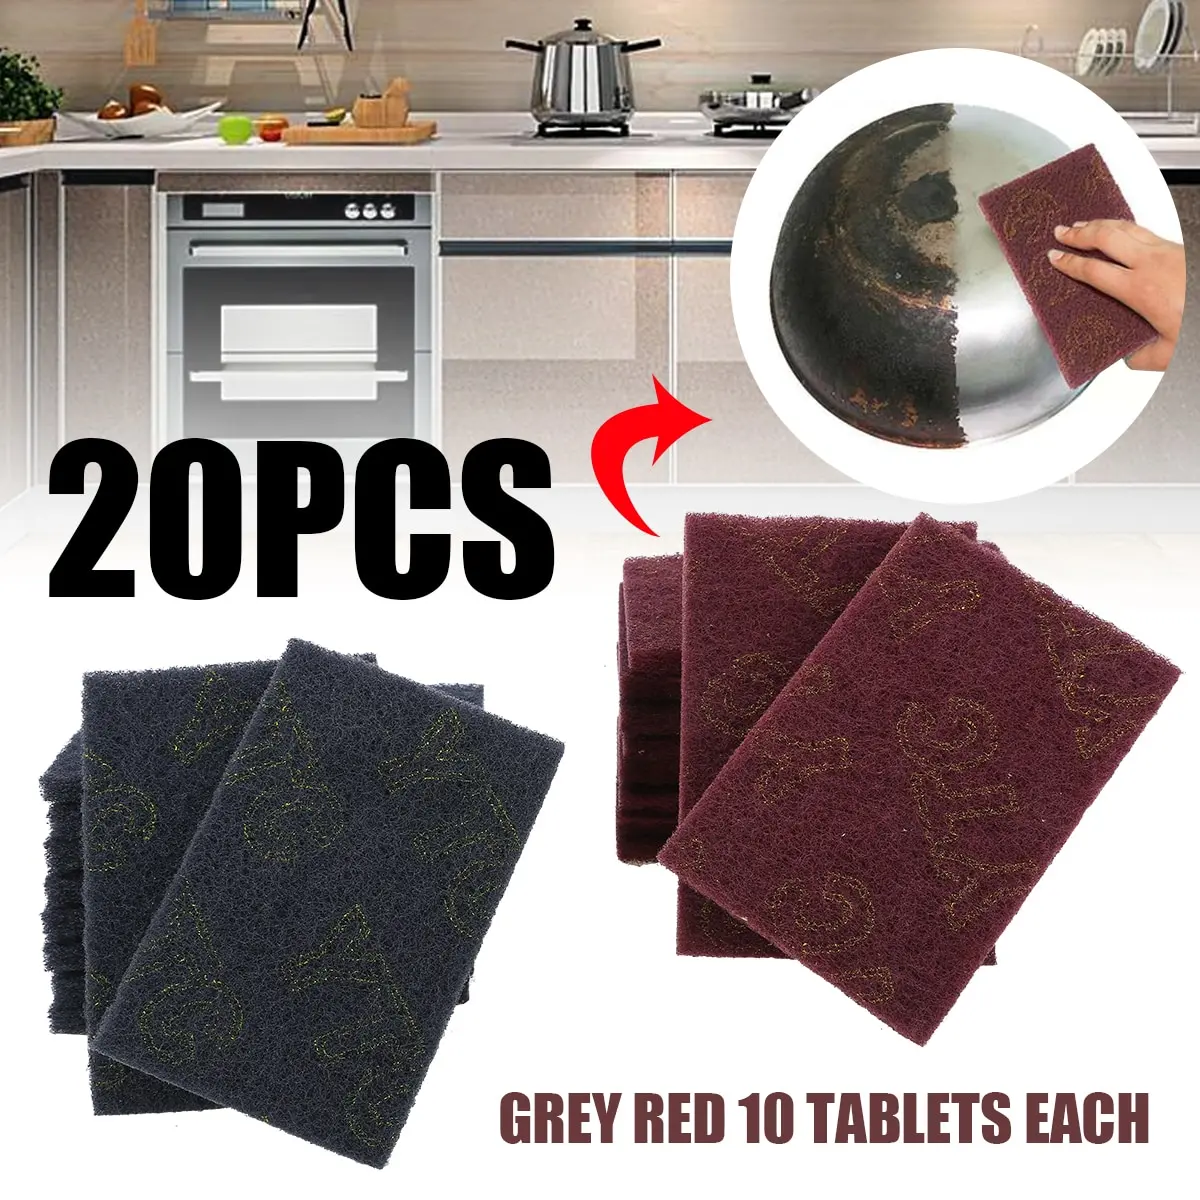 

20pcs 15 x 10 x 0.7cm Grey/Red Abrasive Finishing Fine Pads Nonwoven Scouring Hand Pad for Kitchen Cleaning